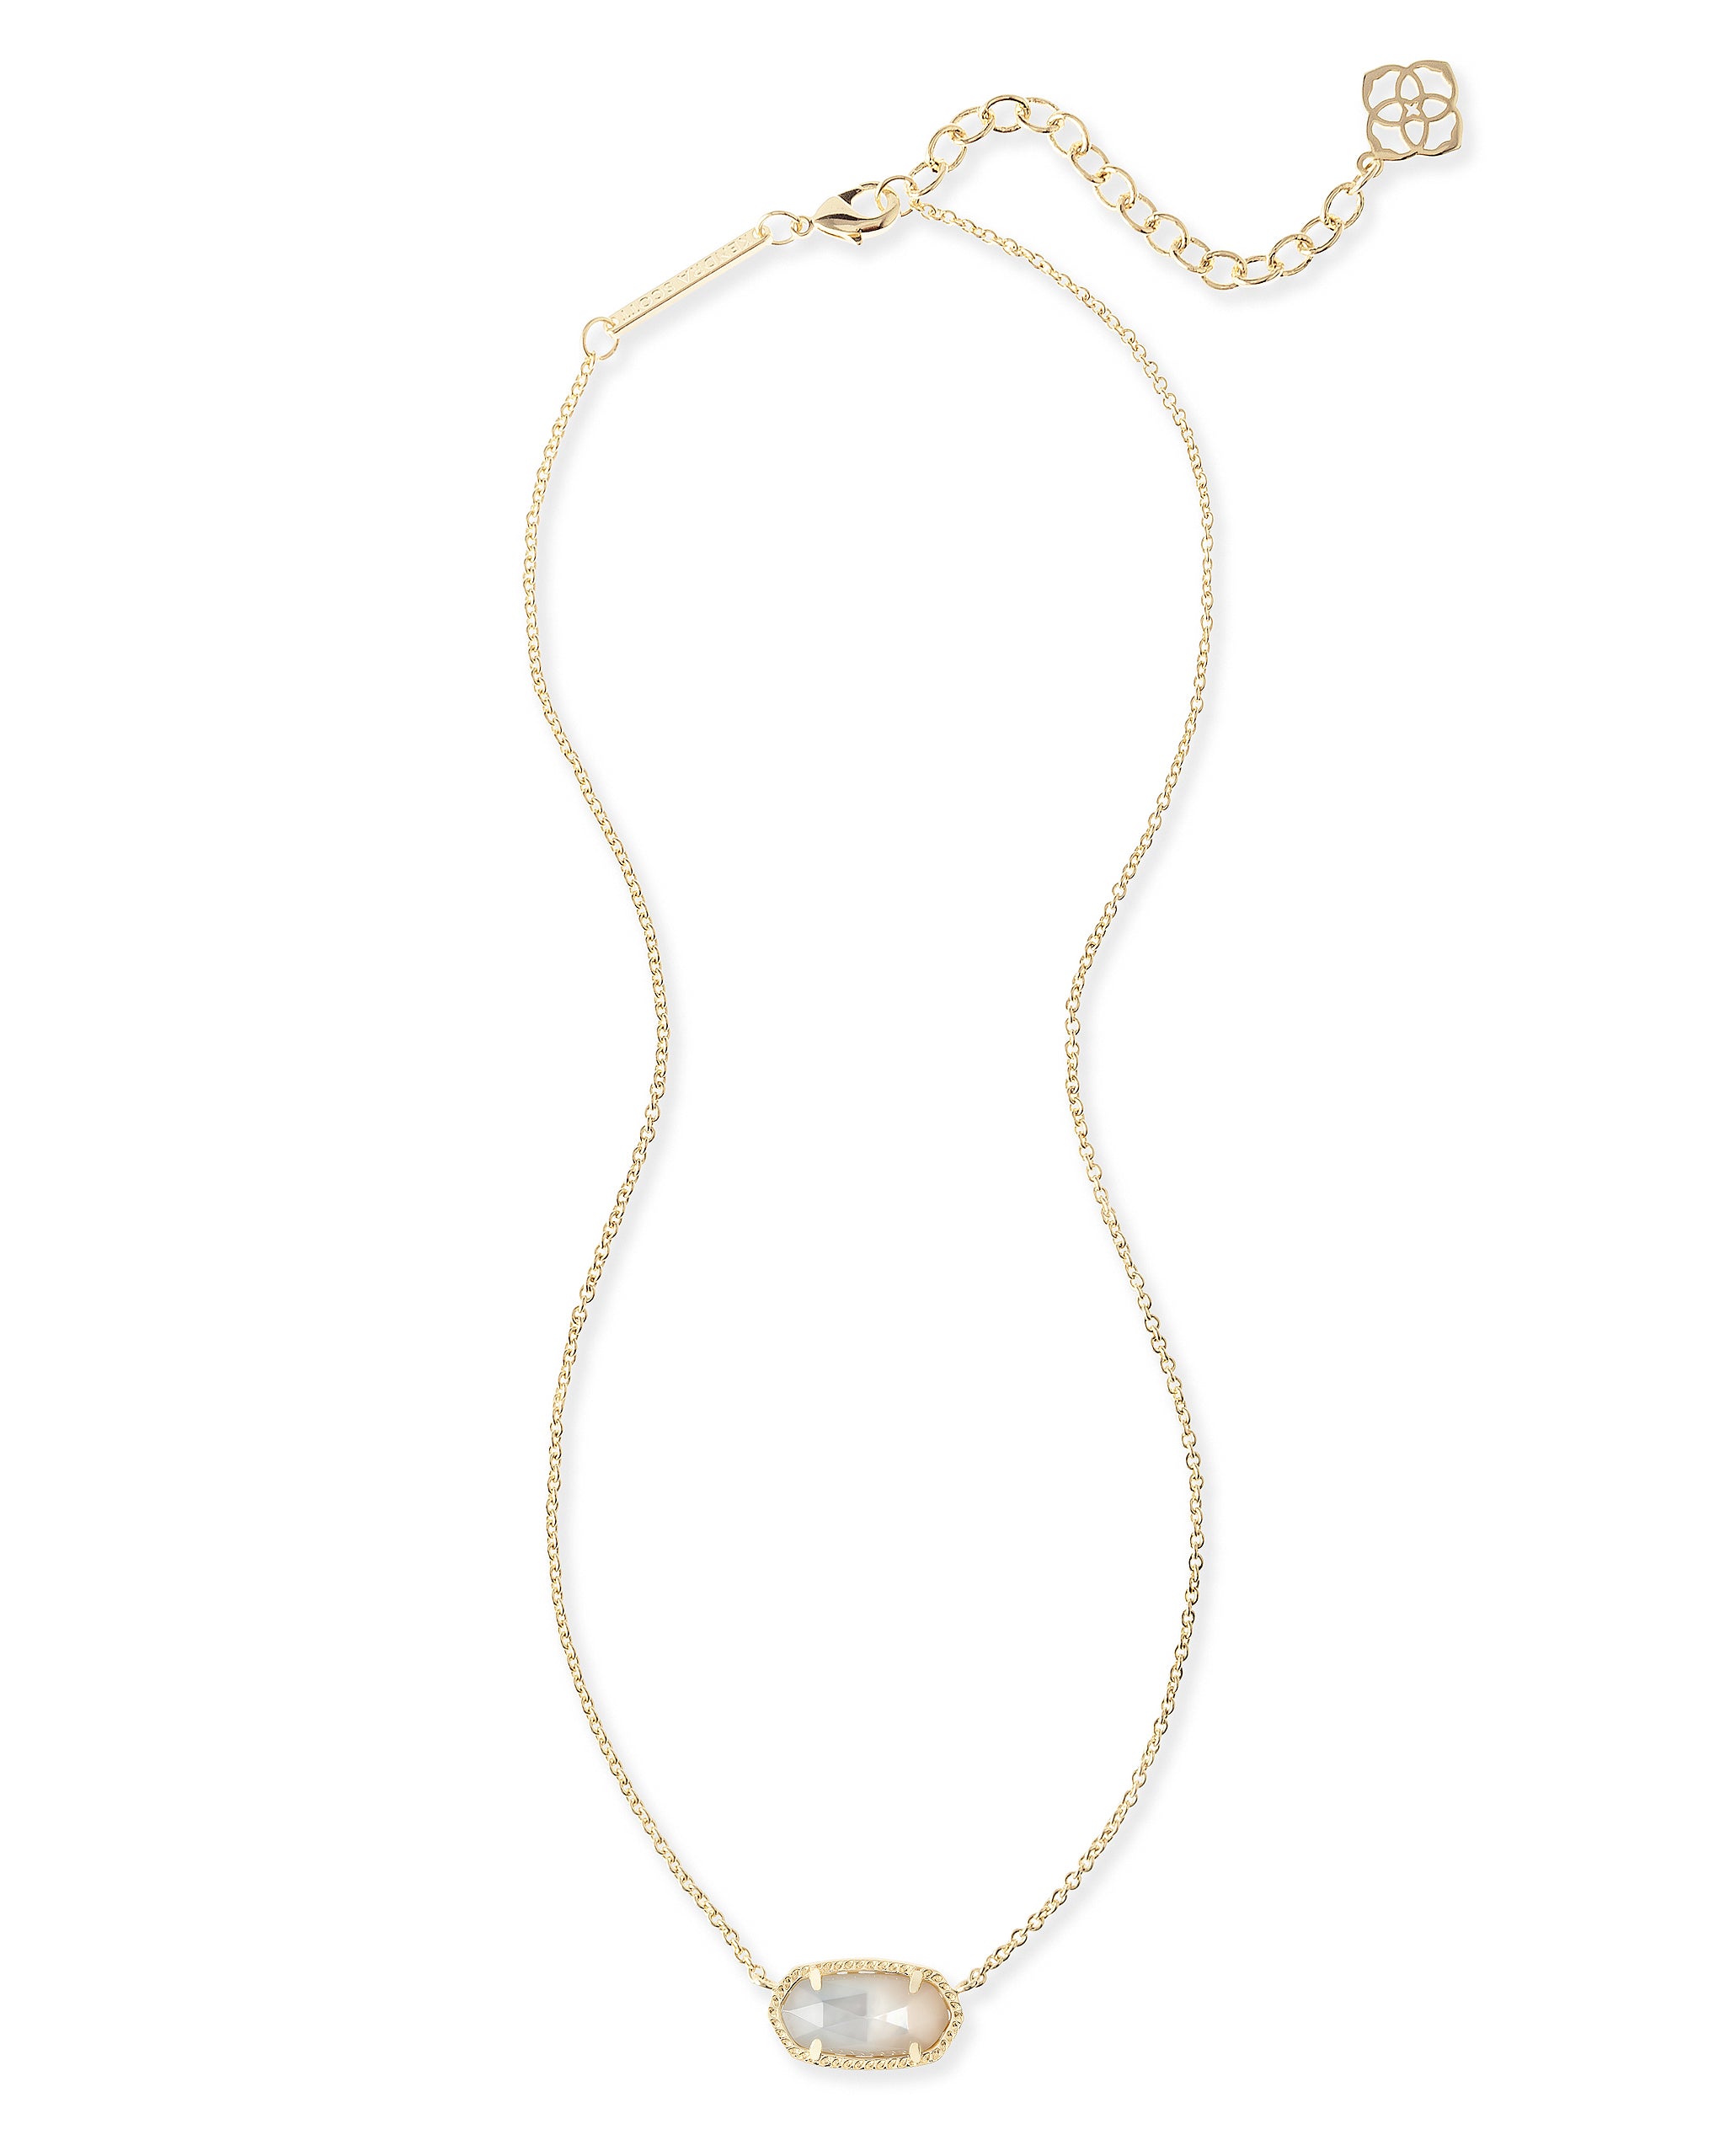 Kendra Scott Elisa Oval Pendant Necklace in Ivory Pearl and Gold